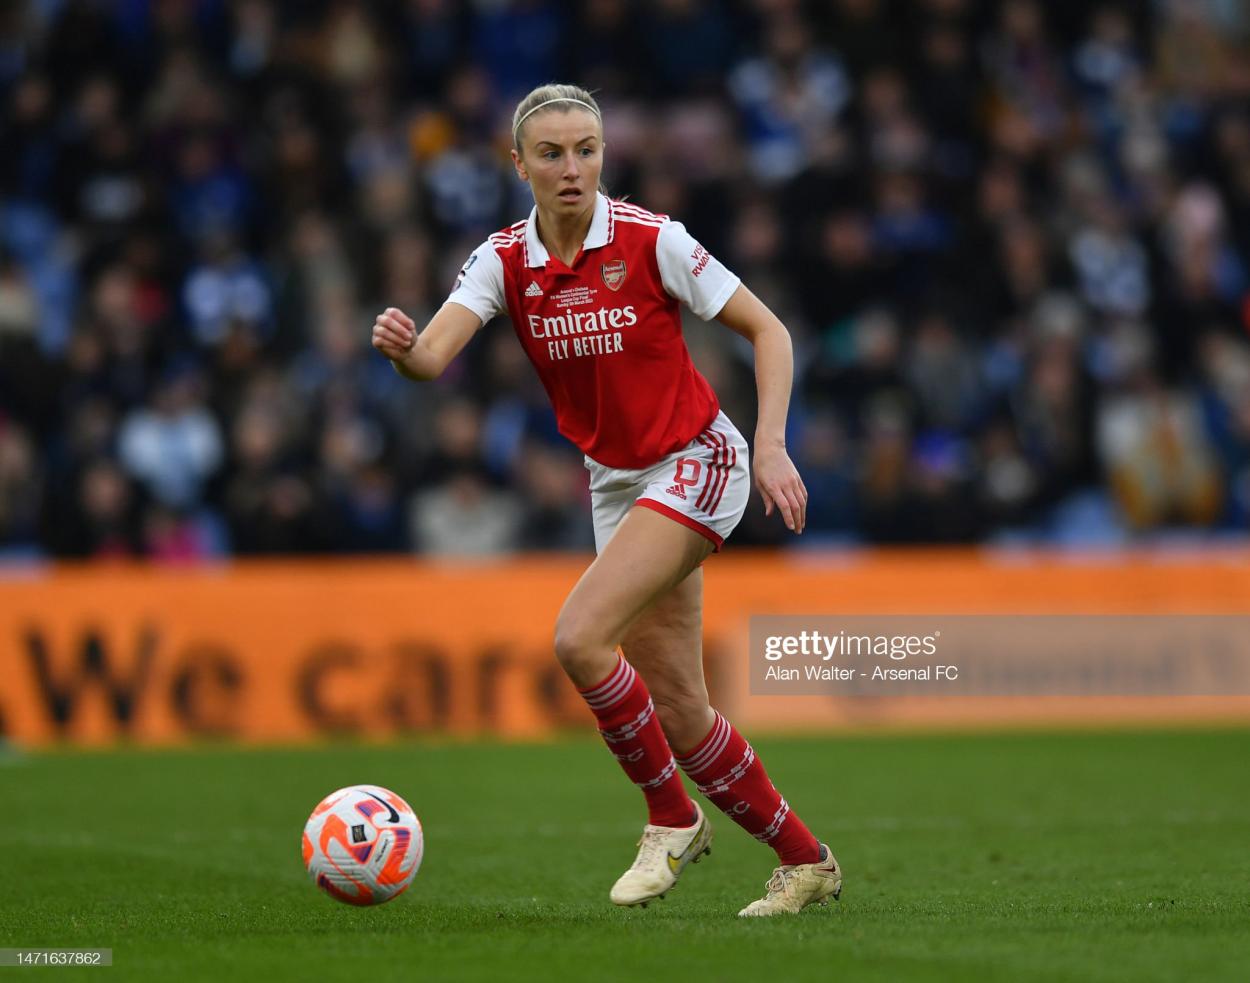 Leah Williamson of Arsenal during the FA Women's Continental Tyres League Cup Final match between Chelsea and Arsenal at Selhurst Park on March 05, 2023 in London, England. (Photo by Alan Walter - Arsenal FC/Arsenal FC via Getty Images)